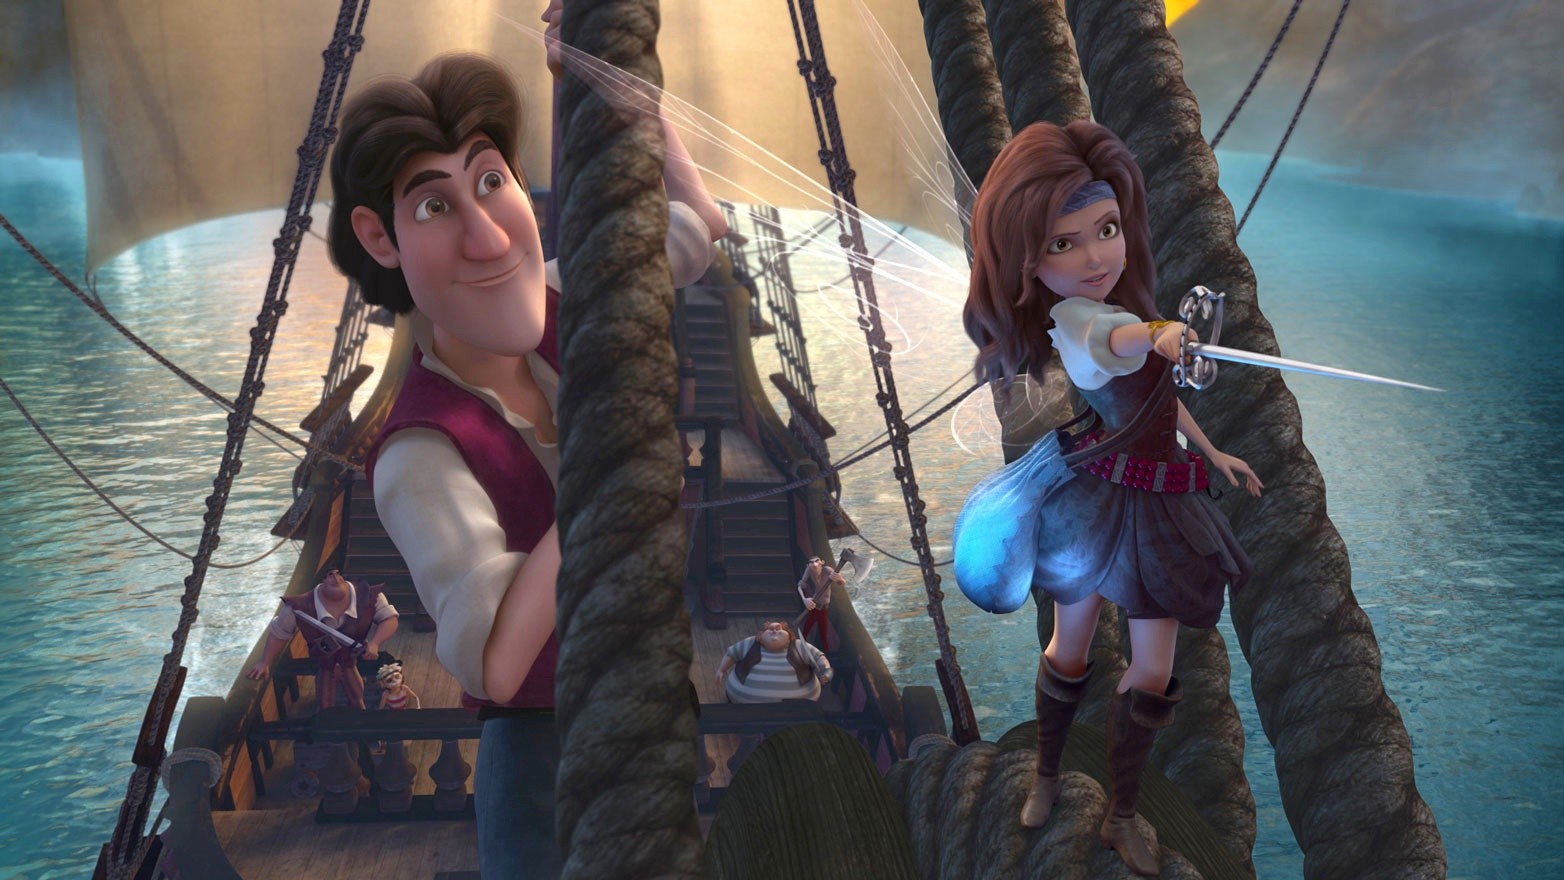 Captain James Hook and Zarina from Walt Disney Pictures' The Pirate Fairy (2014)